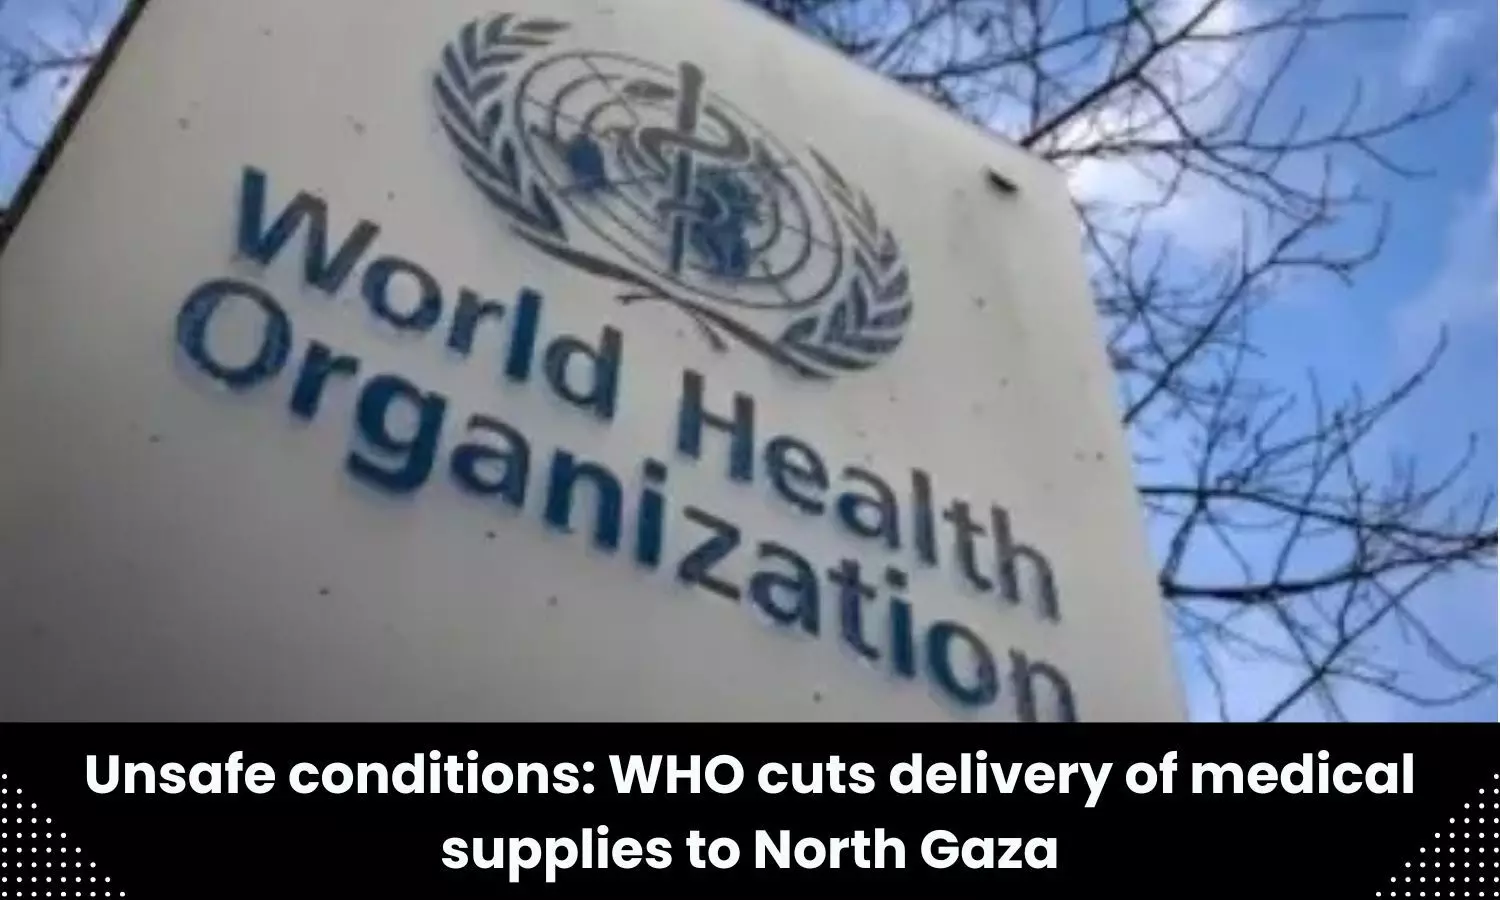 WHO axes medical aid delivery to north Gaza in absence of security guarantees